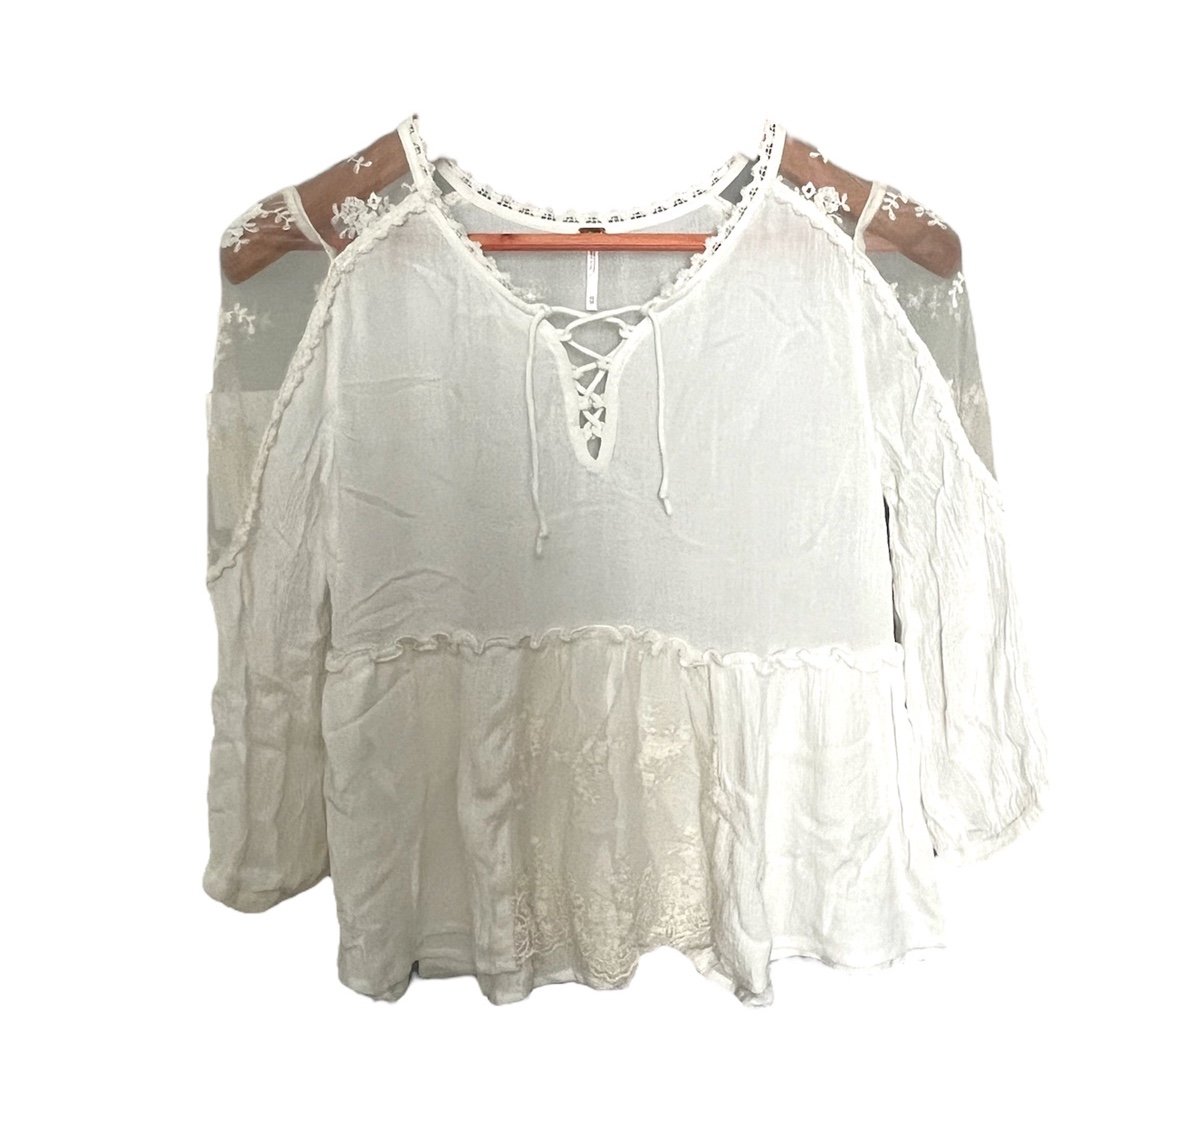 Comfortable Free People Lace White Top Size xs nEPjF19p